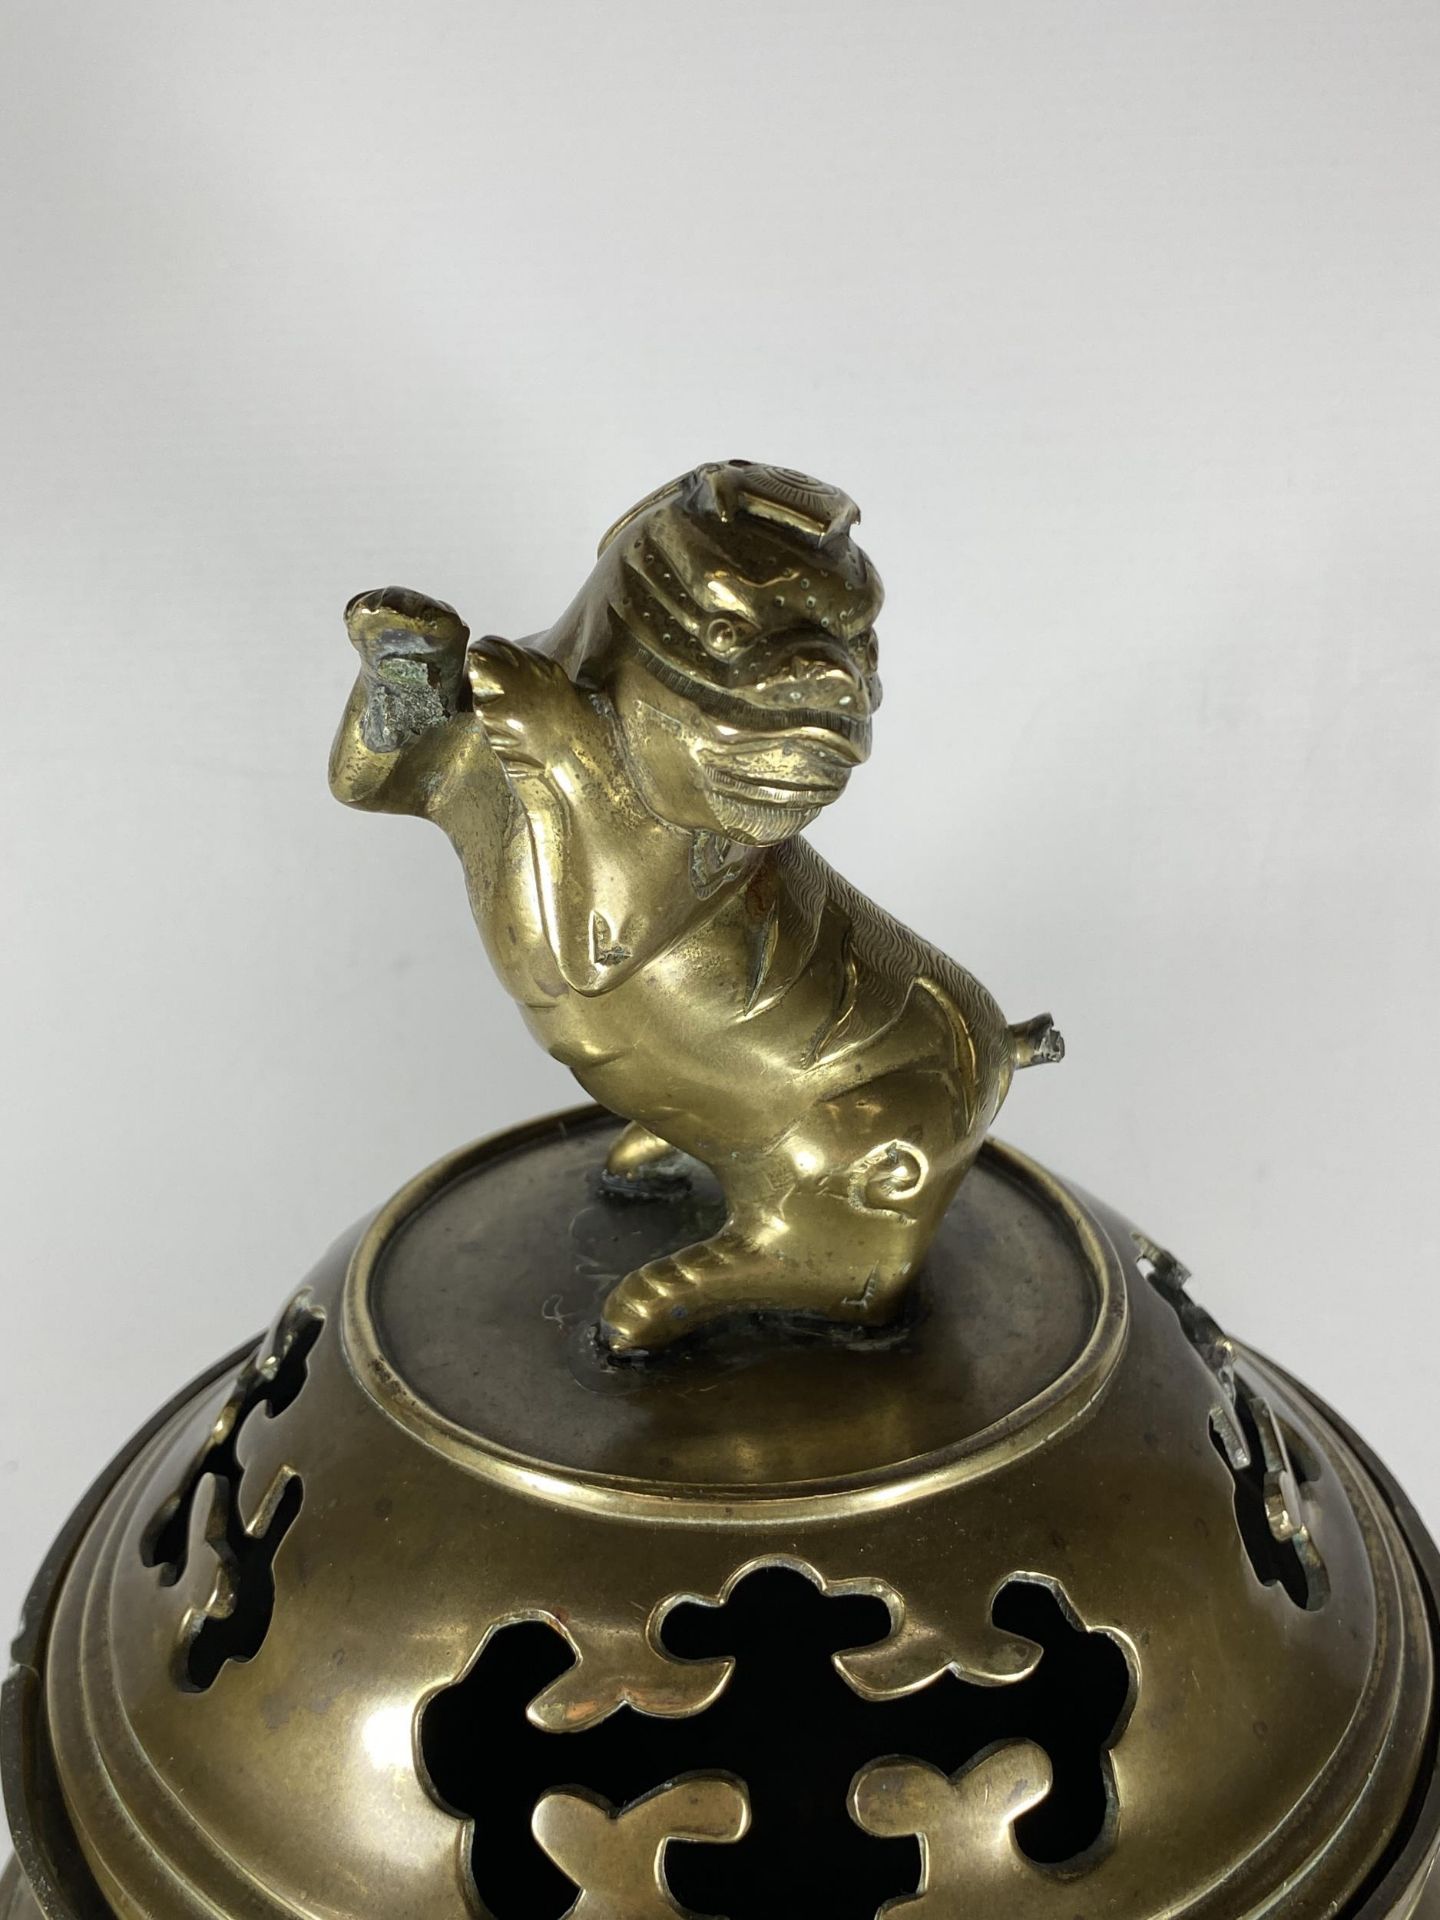 A LARGE CHINESE TWIN HANDLED BRASS LIDDED TEMPLE JAR, WITH DRAGONS CHASING THE FLAMING PEARL - Image 3 of 8